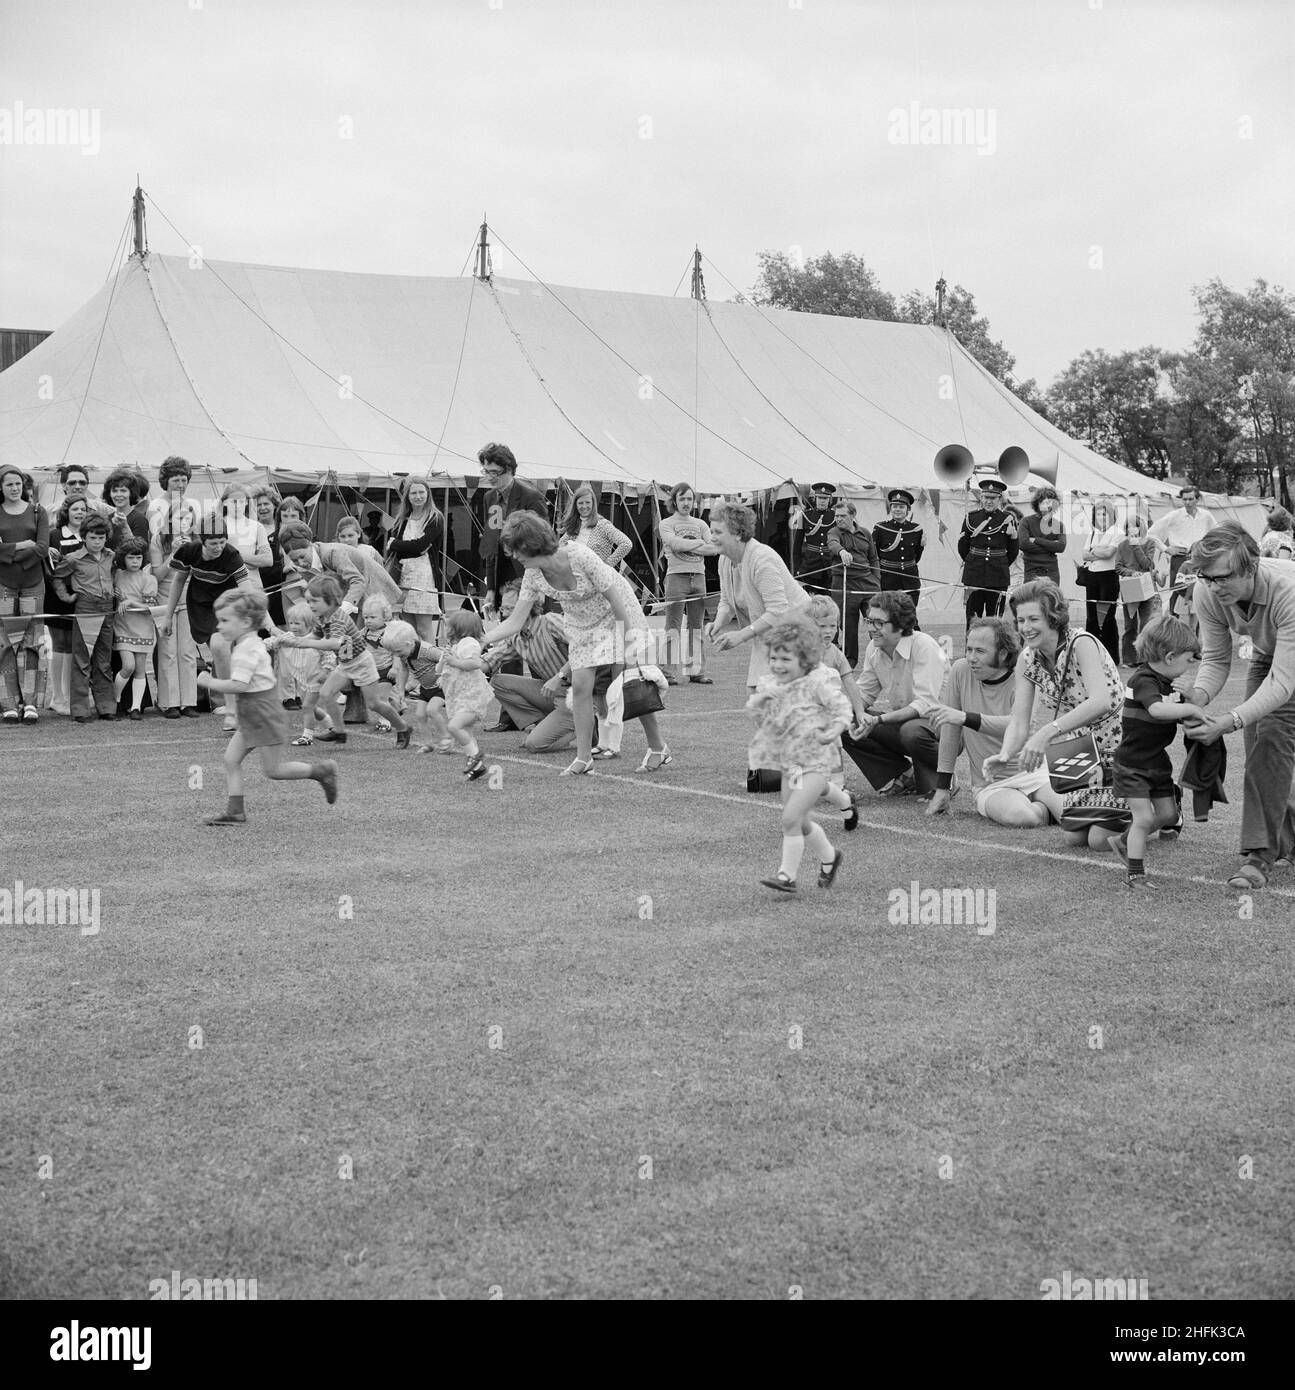 Laing Sports Ground, Rowley Lane, Elstree, Barnet, London, 09/06/1973. Toddlers in a running race, with adults watching from the starting line, at the annual Gala Day held at the Laing Sports Ground. The annual Gala Day was held at the Laing Sports Ground on 9th June 1973. Attractions included police dog demonstrations, model aircraft, the Royal British Legion band, children's races, and sports. In the evening there was dancing and bingo in the Club House, and 'beer and beat' in the marquee. Over 2,000 people attended the gala, and over 600 people stayed for the evening entertainment. This pho Stock Photo